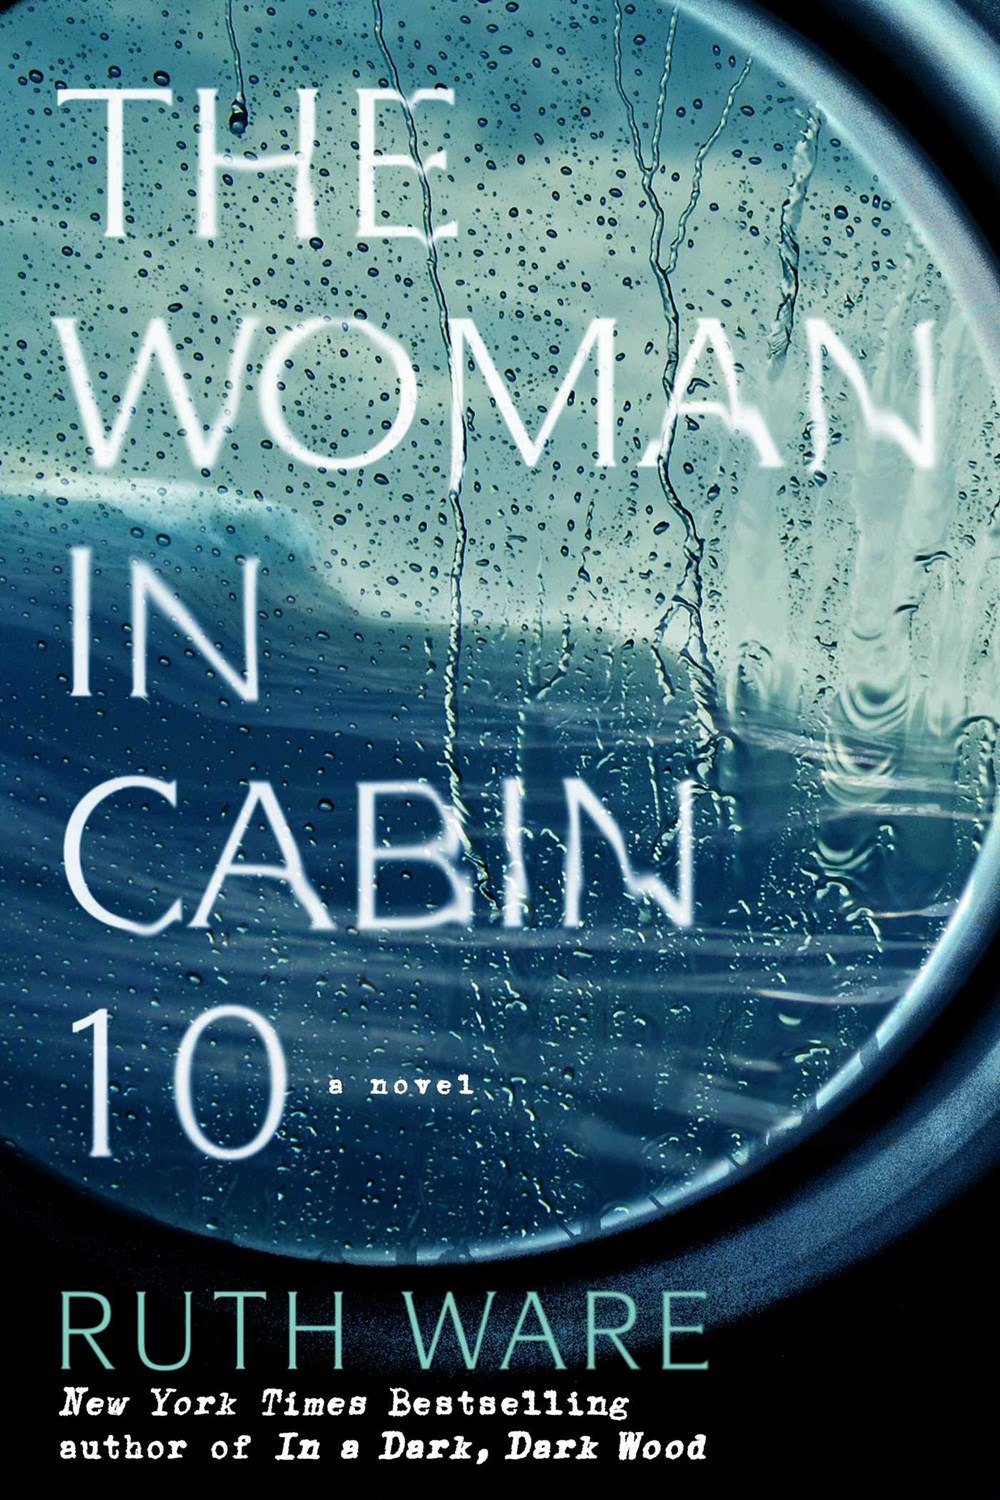 Ruth Ware – The Woman In Cabin 10